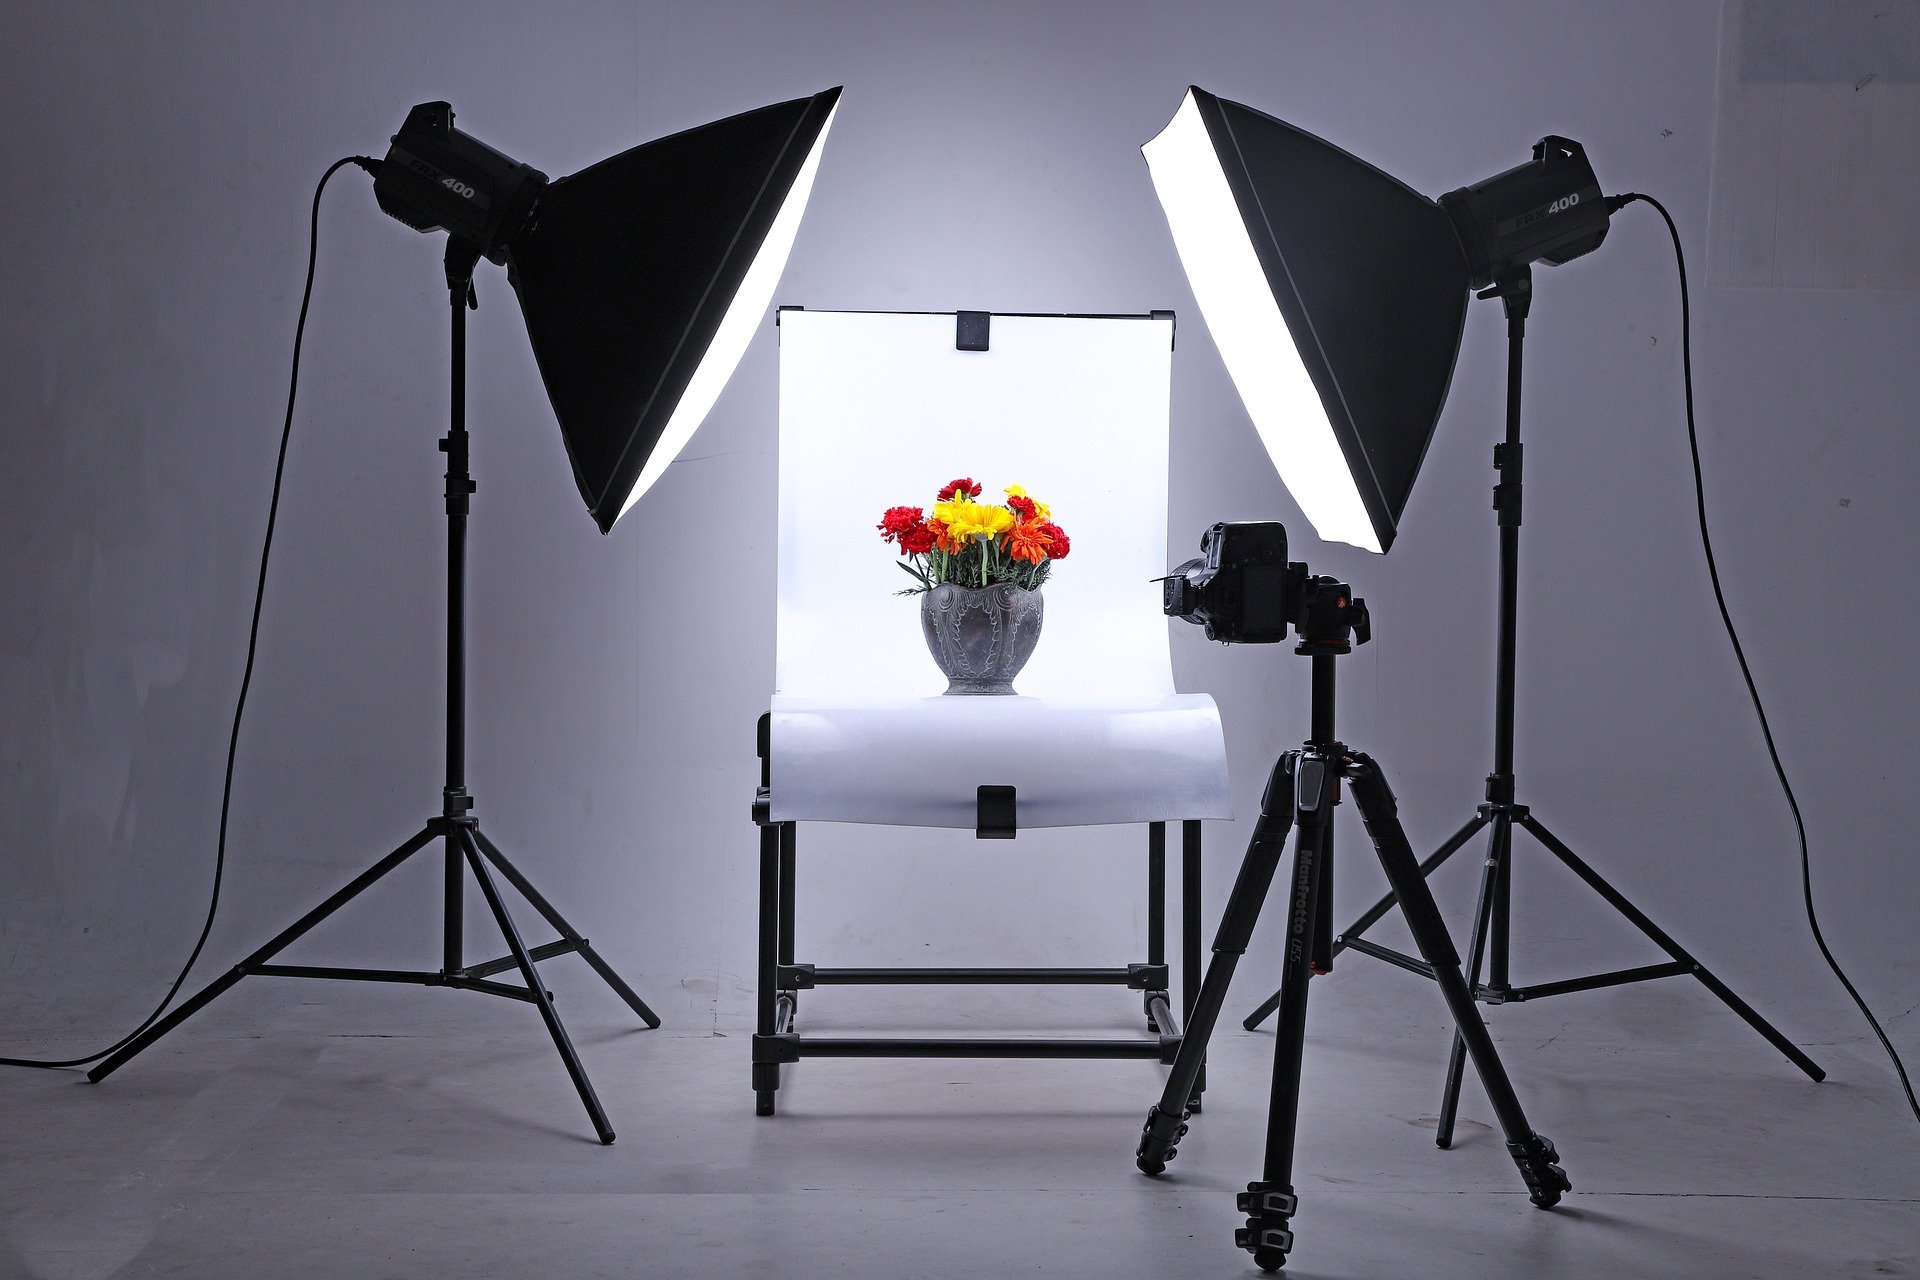 The Complete Guide to Choosing Light Boxes